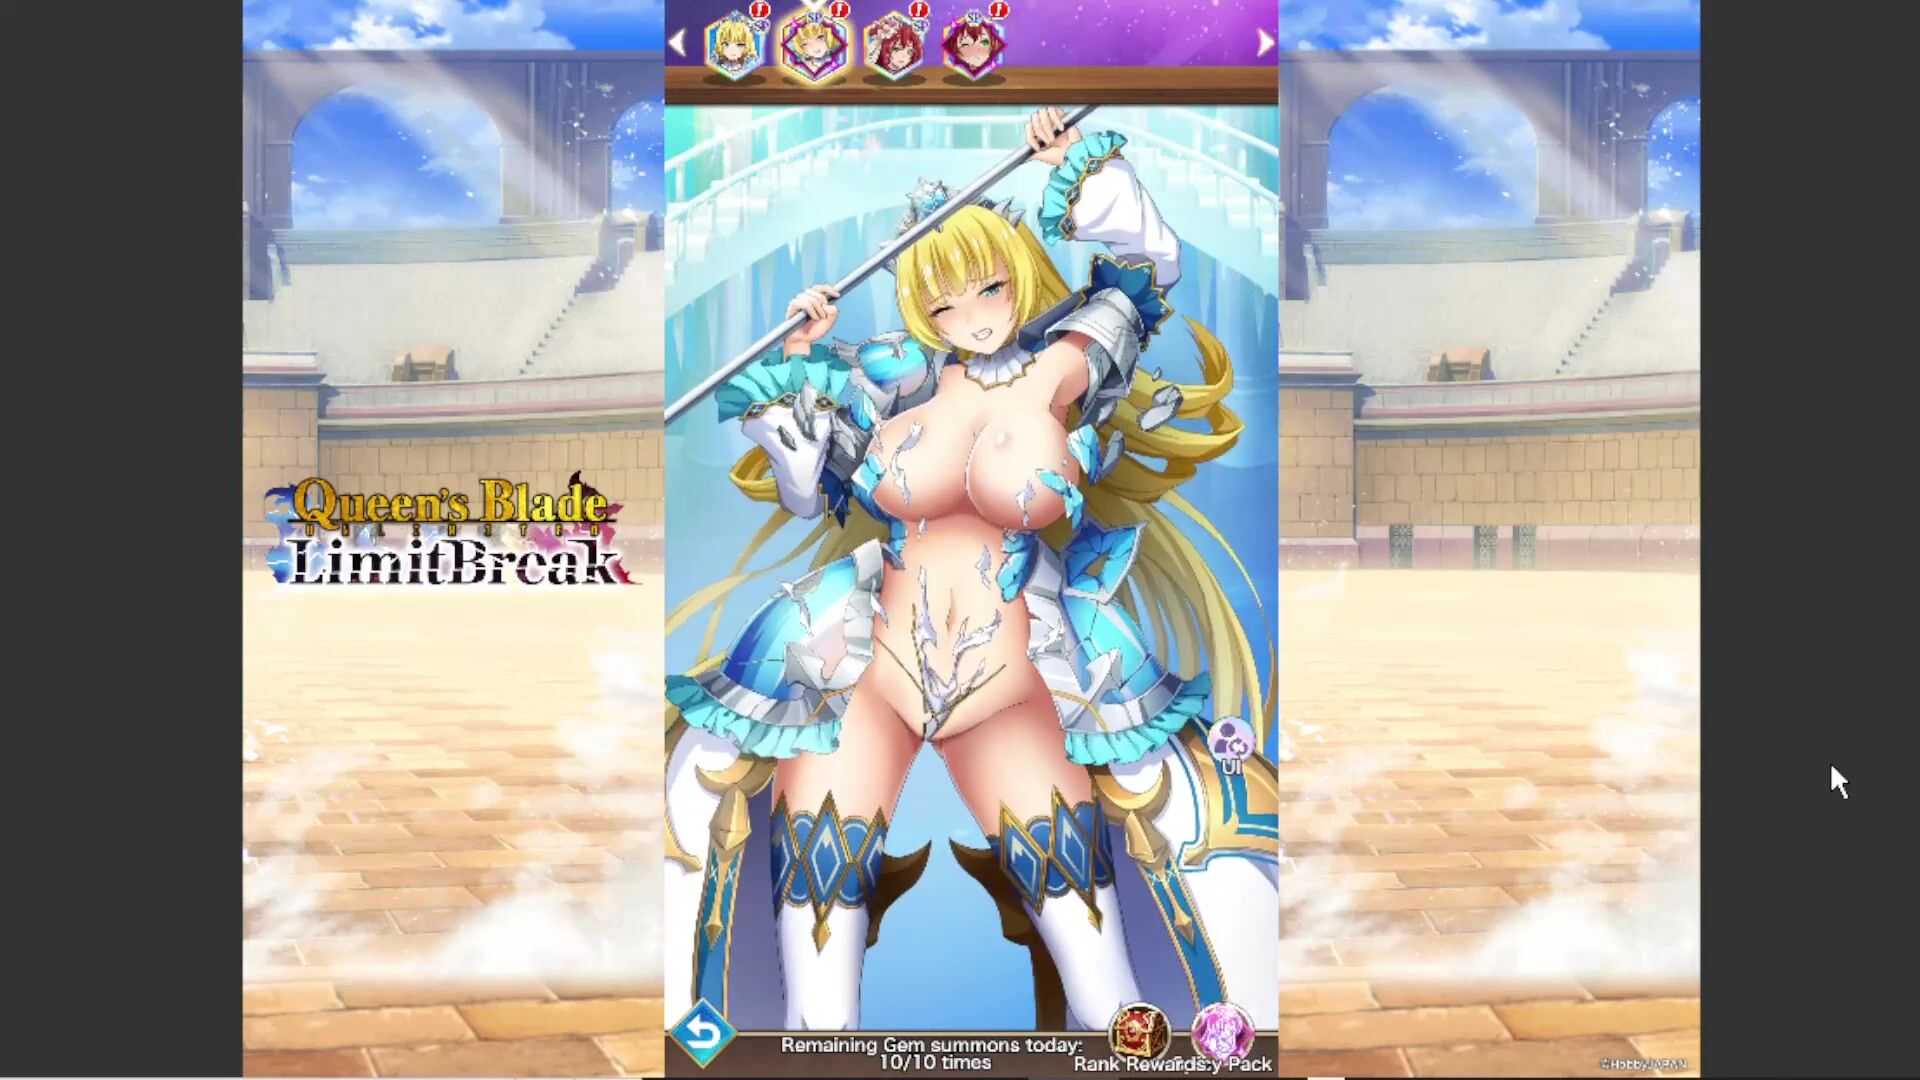 Queen's blade where to watch